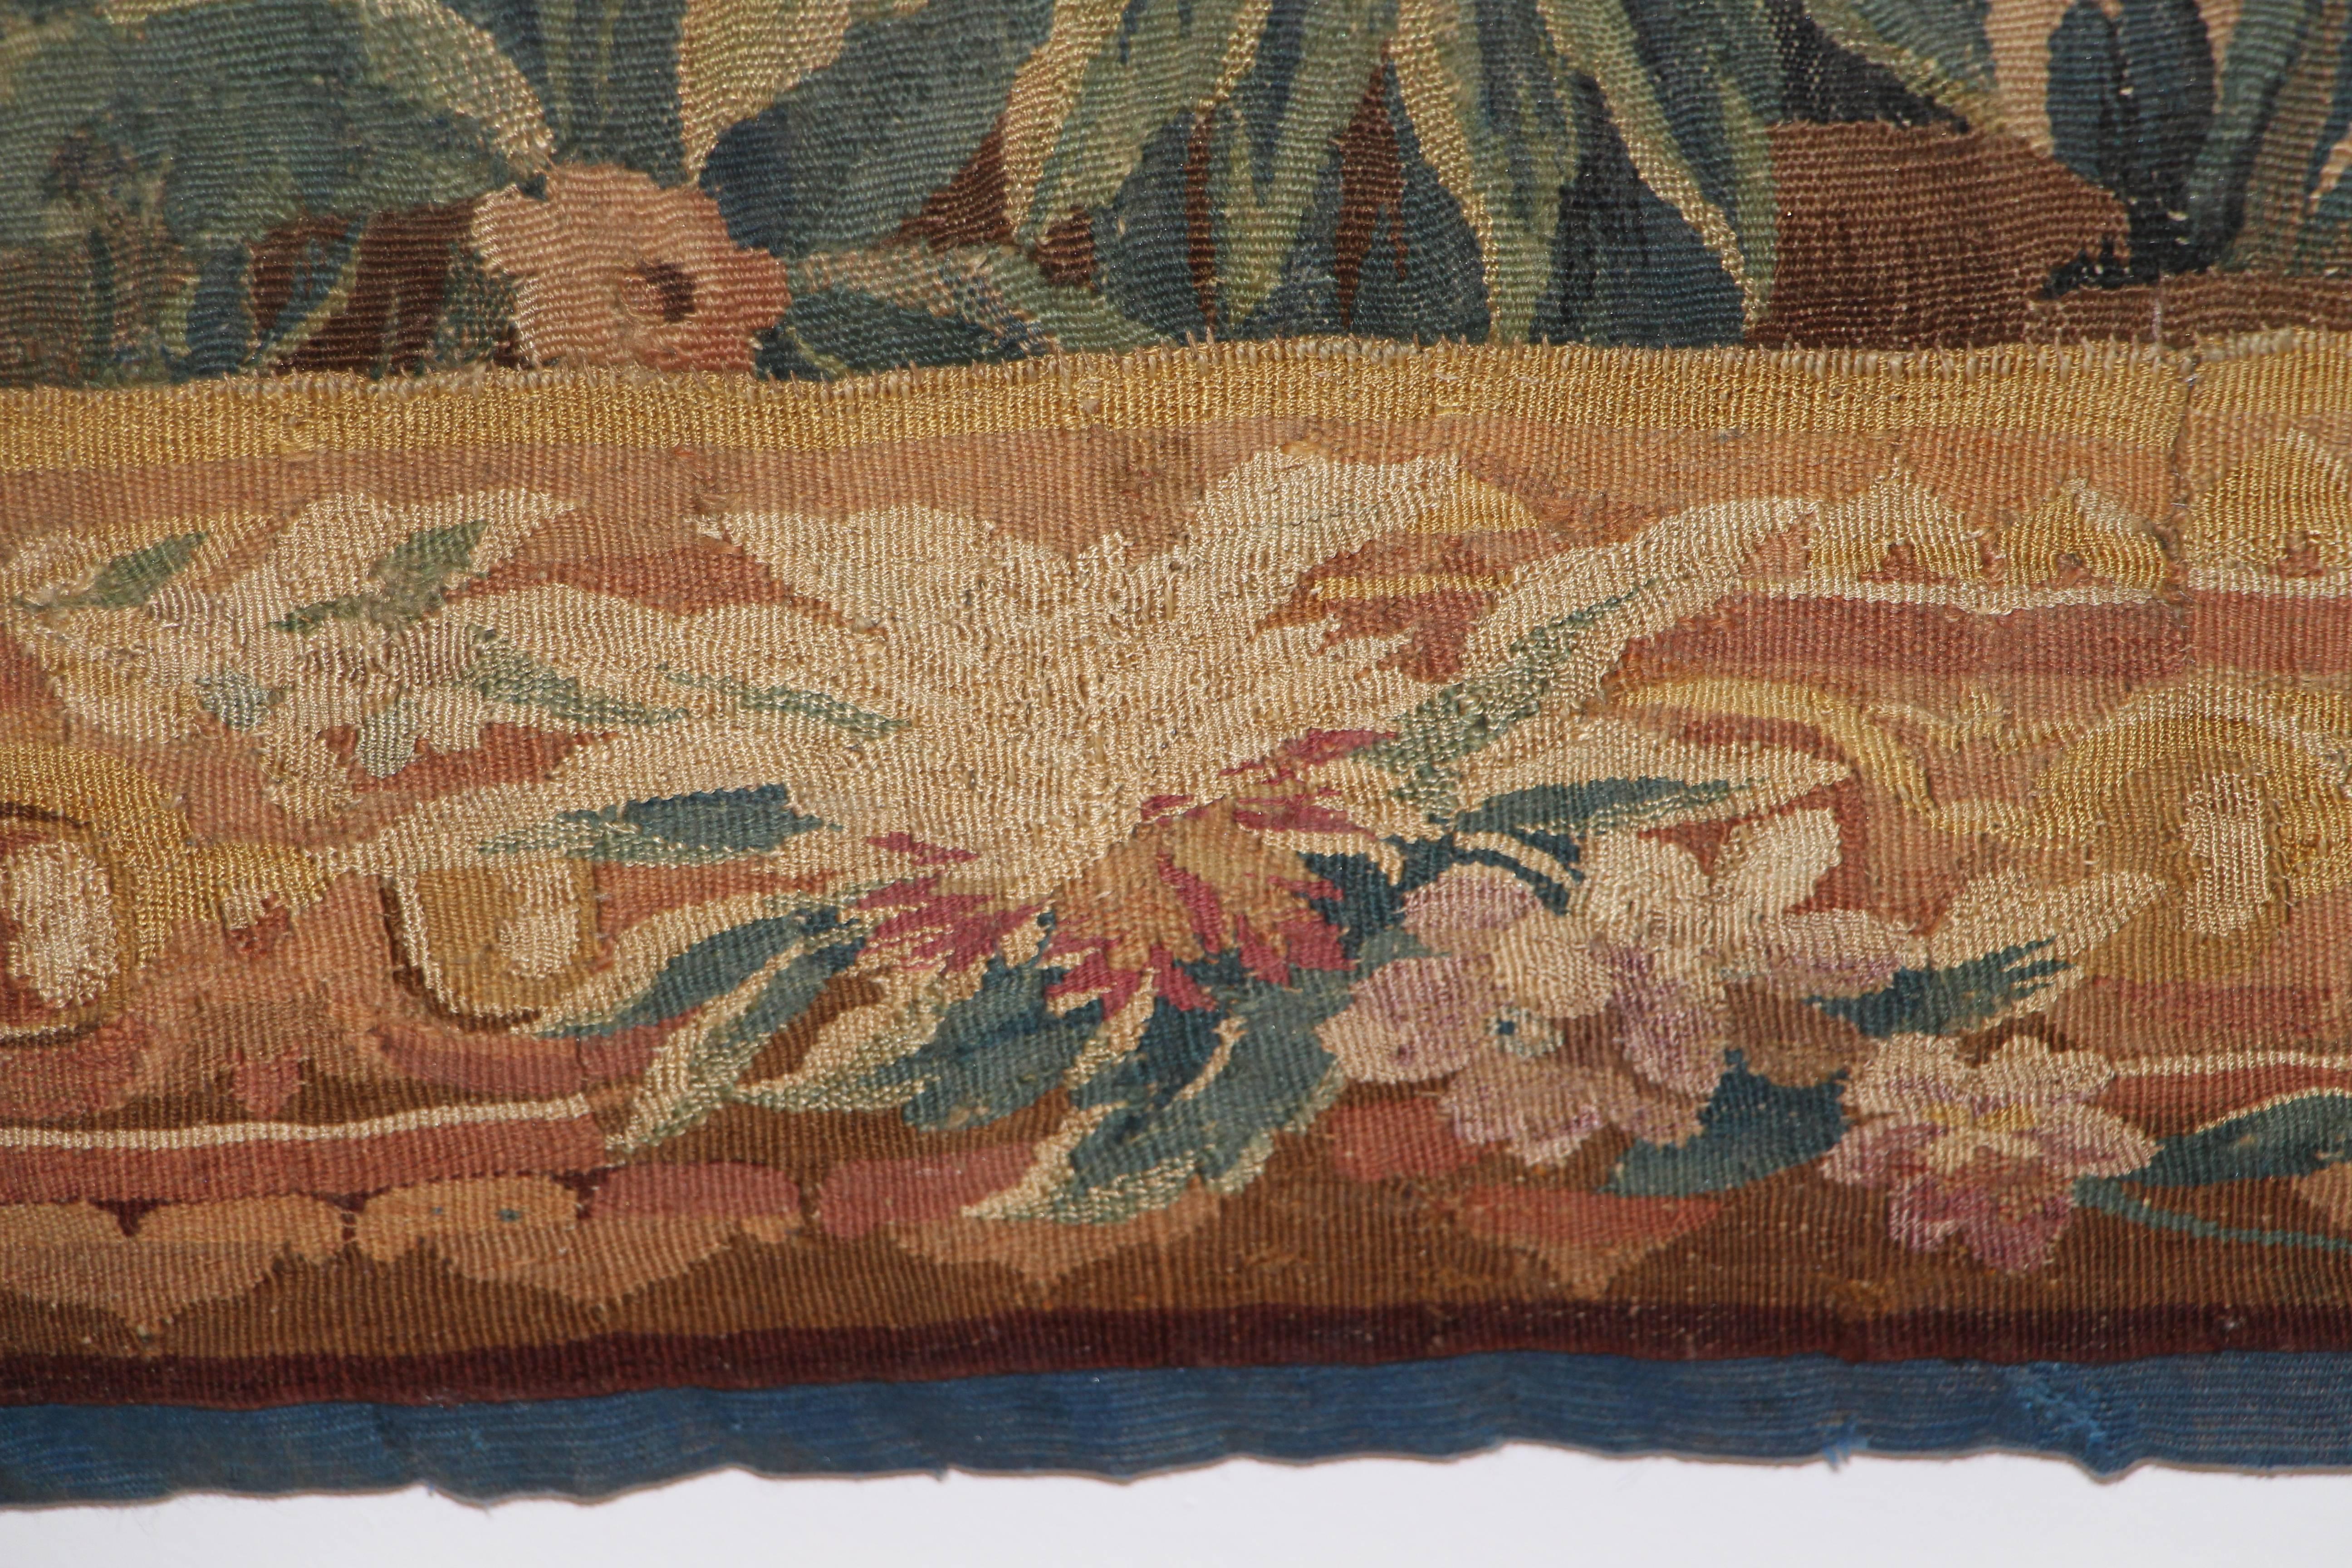 Woven at Aubusson in workshop of Marchand-Lissier by Jean François Picon.